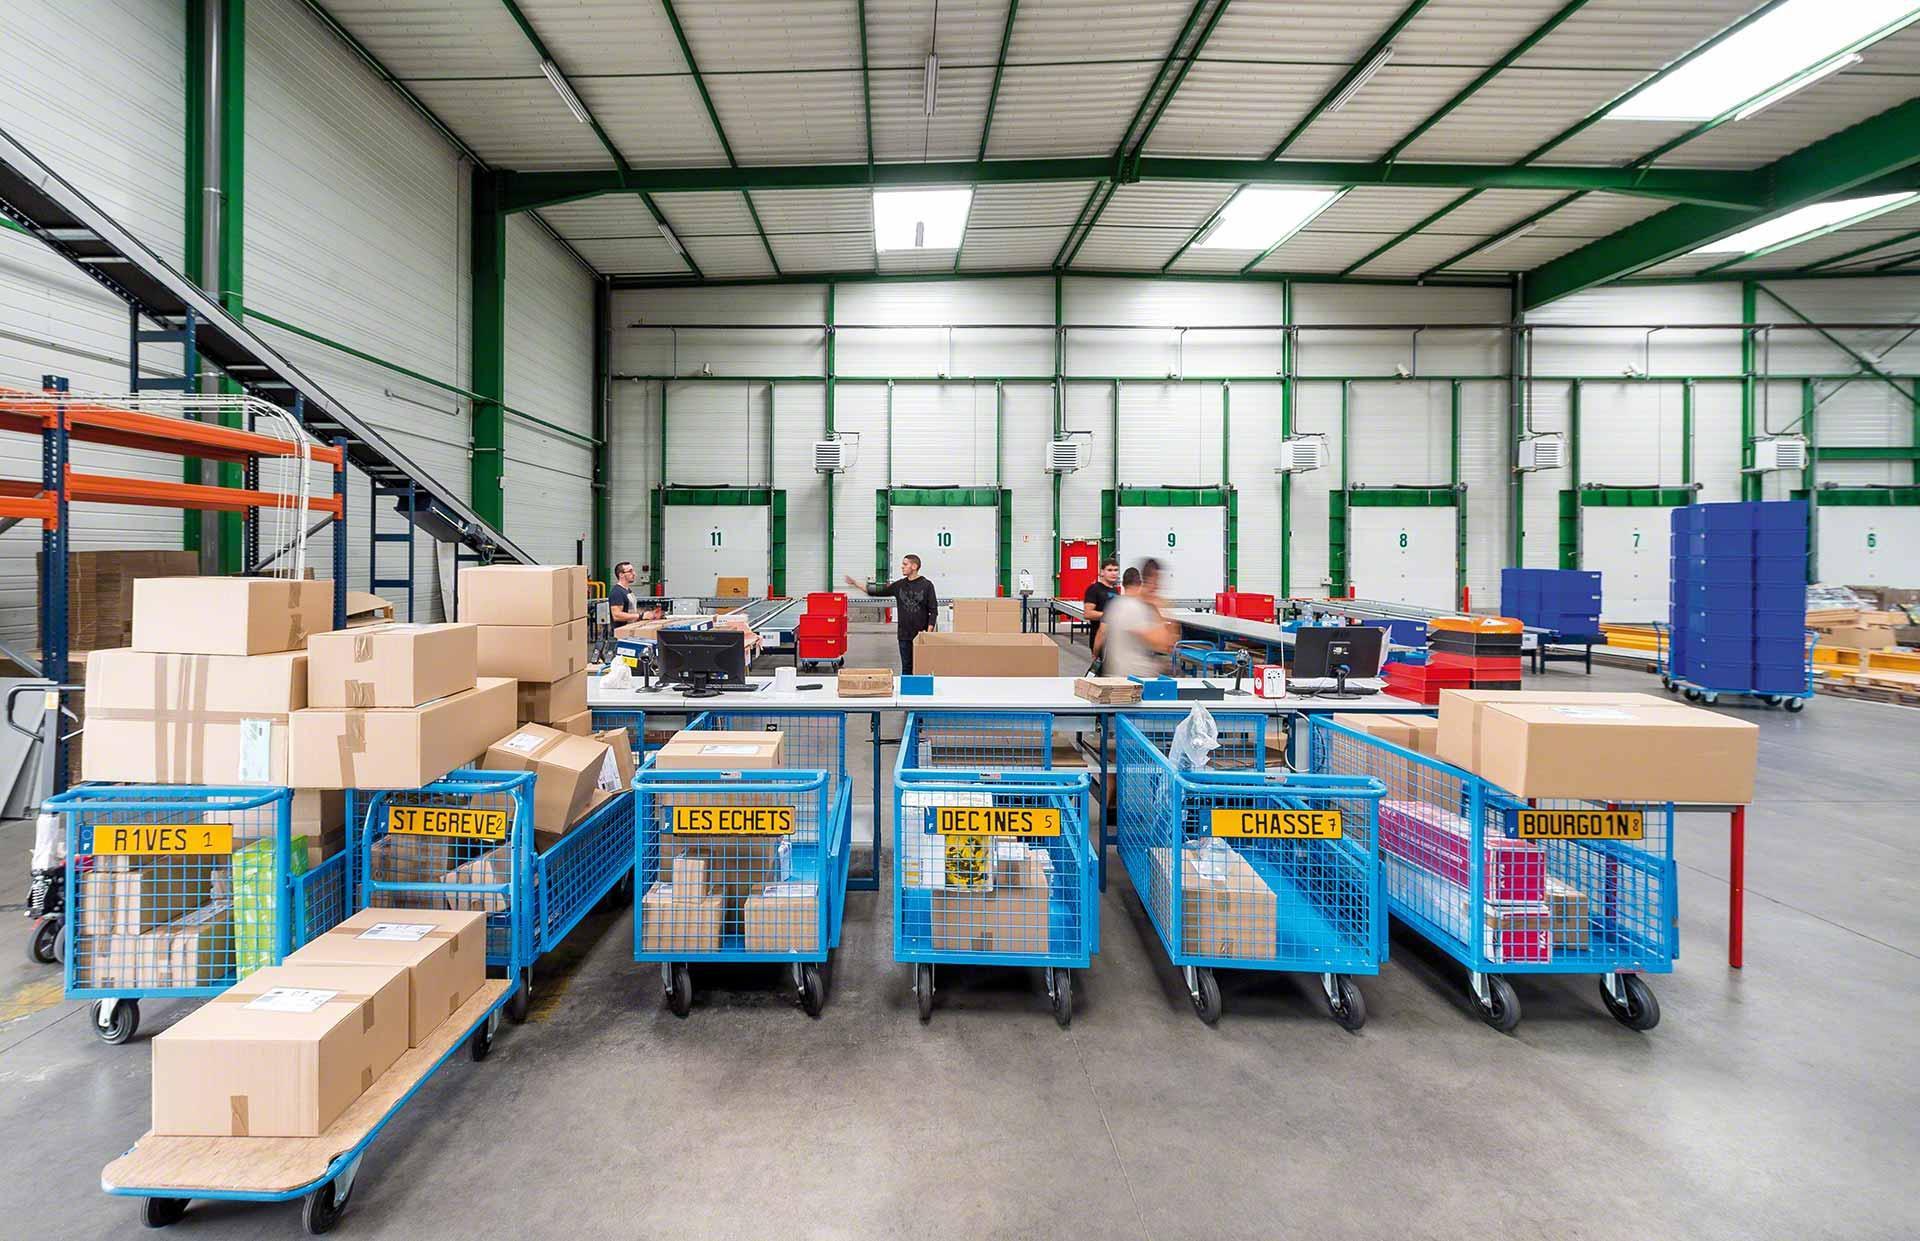 Improving warehouse productivity involves analyzing each procedure, especially those related to order fulfillment